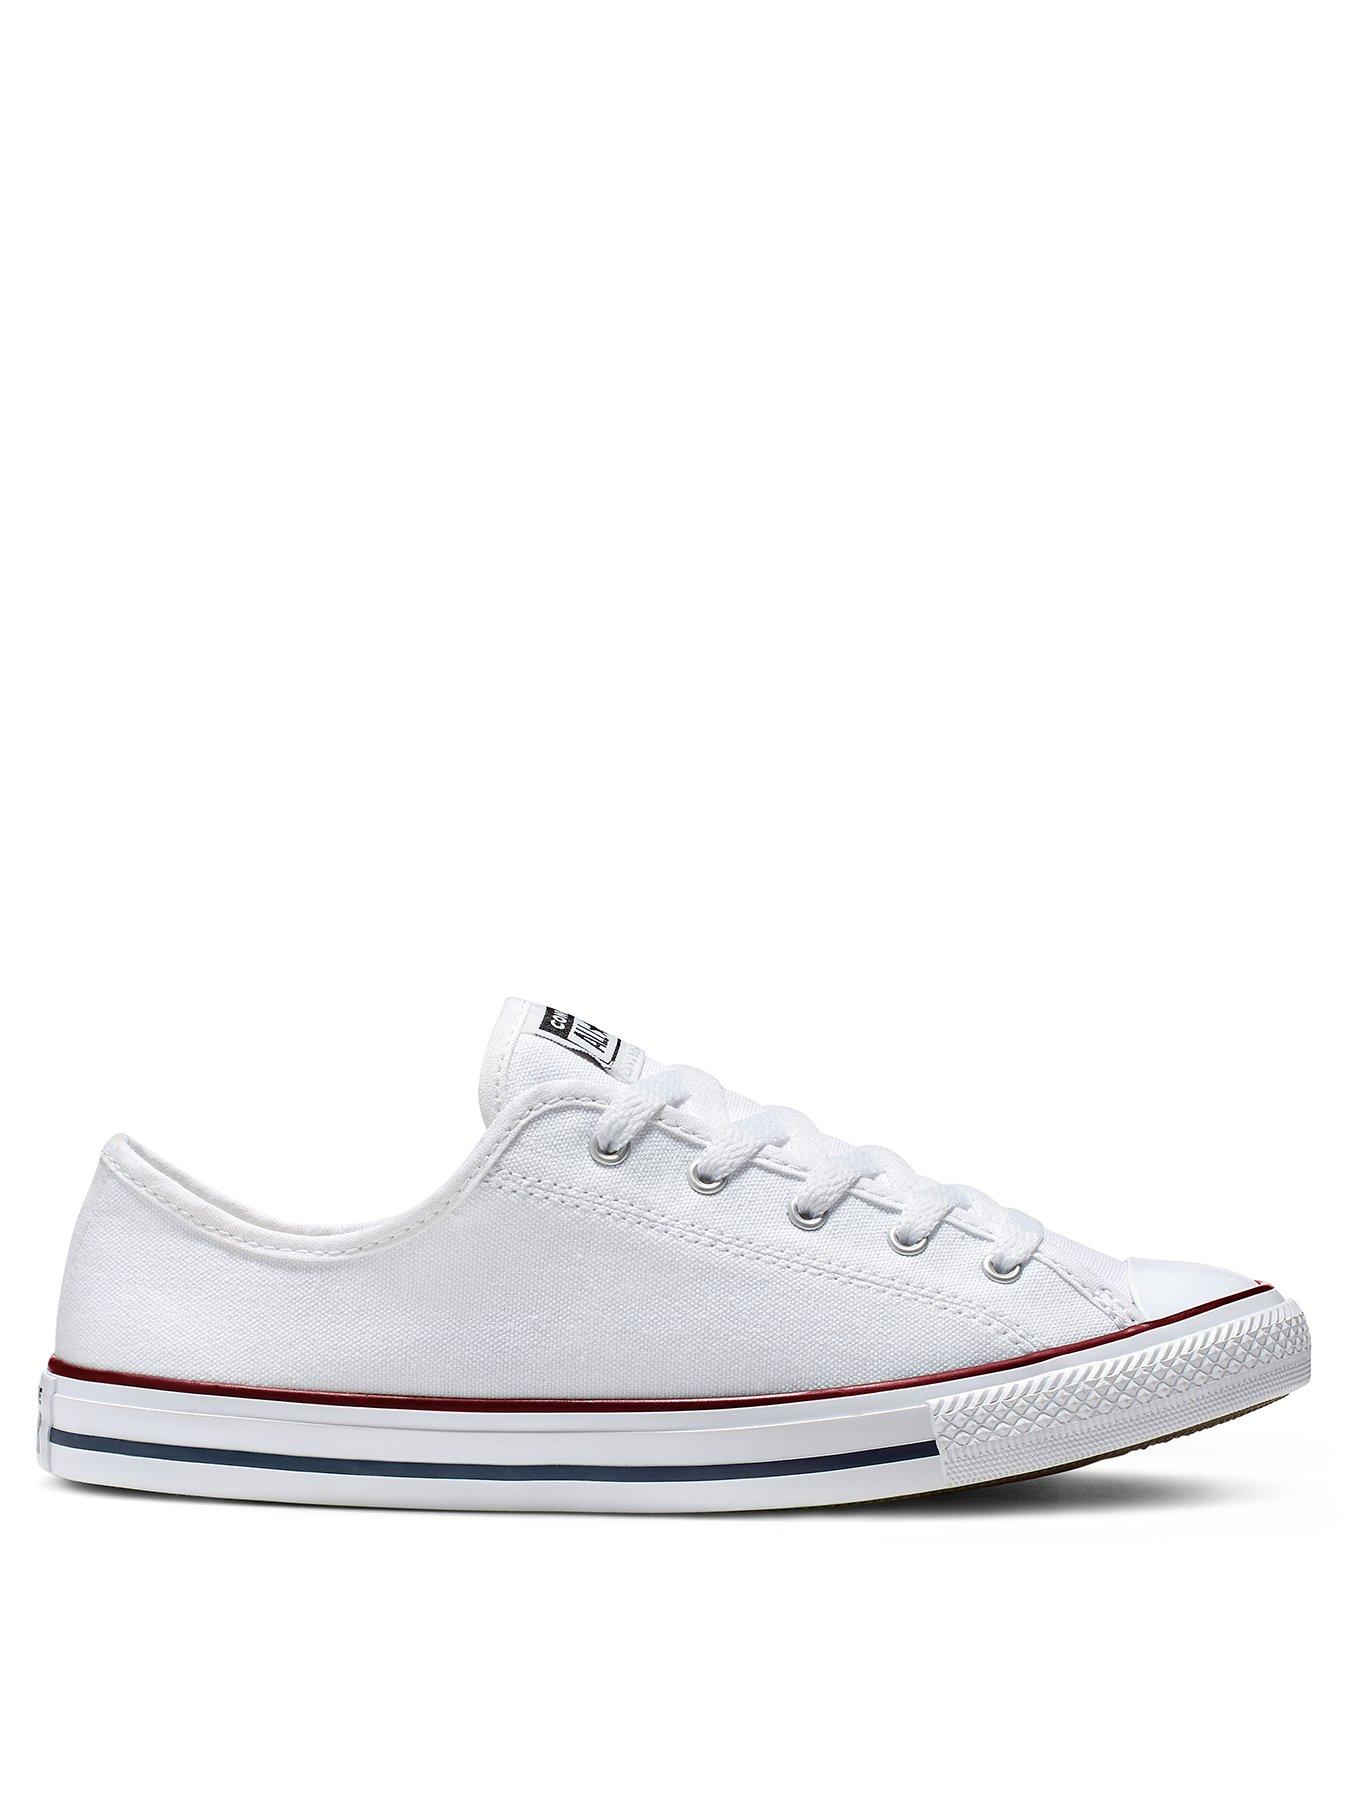 converse dainty ox white leather